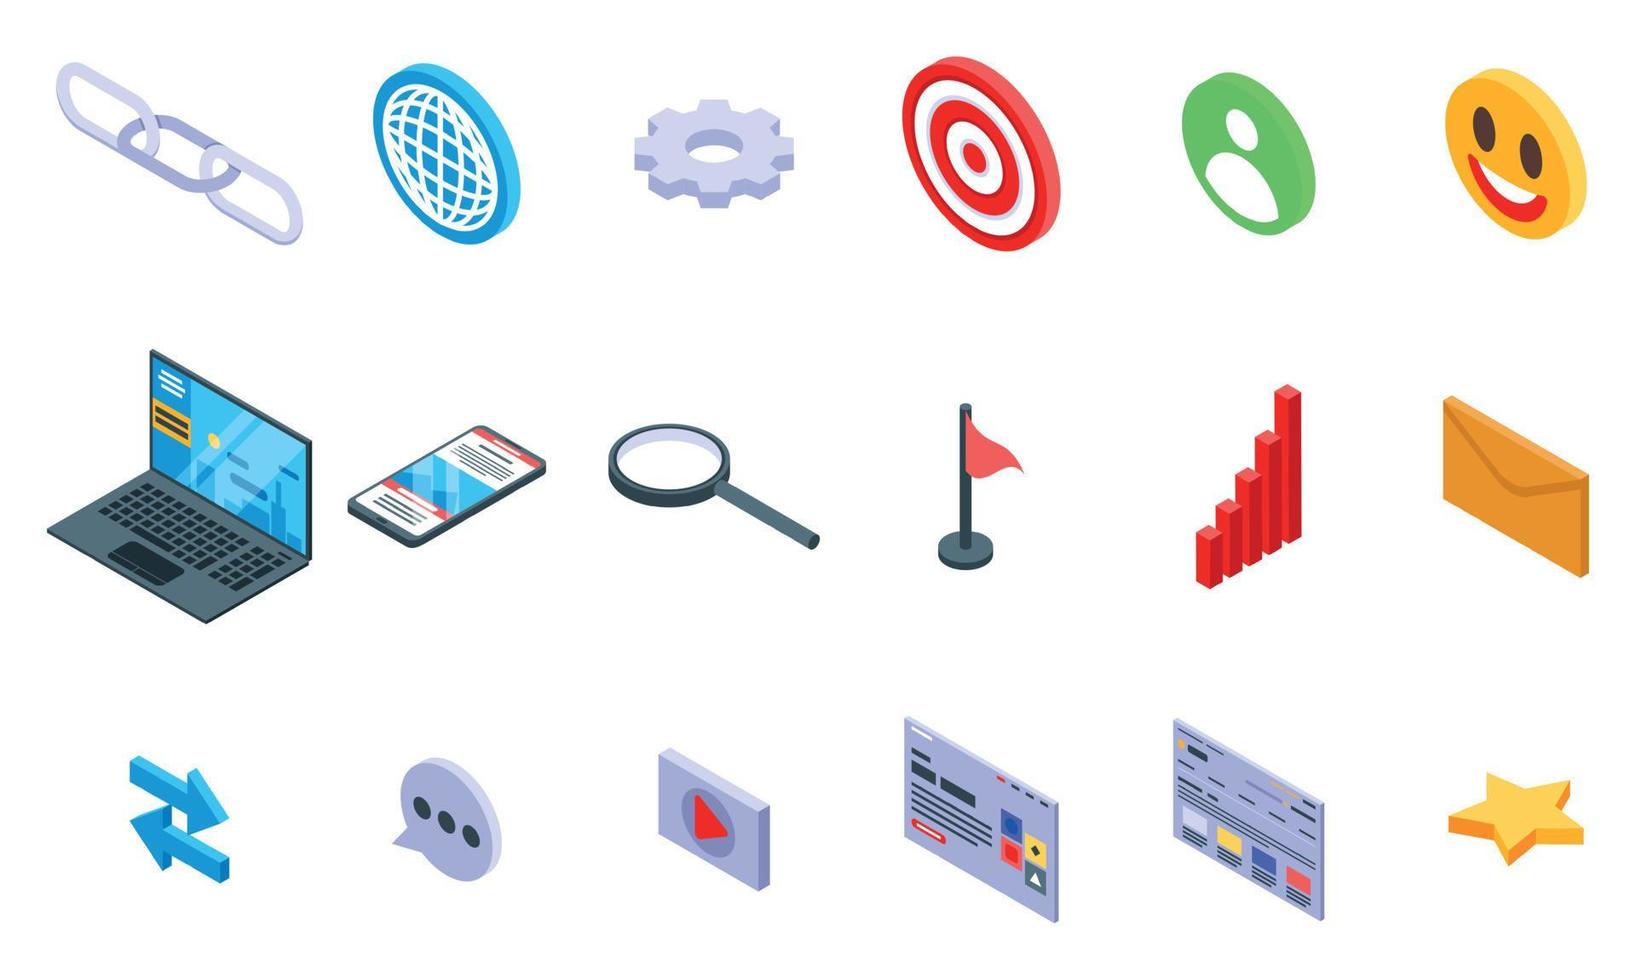 Backlink strategy icons set, isometric style vector